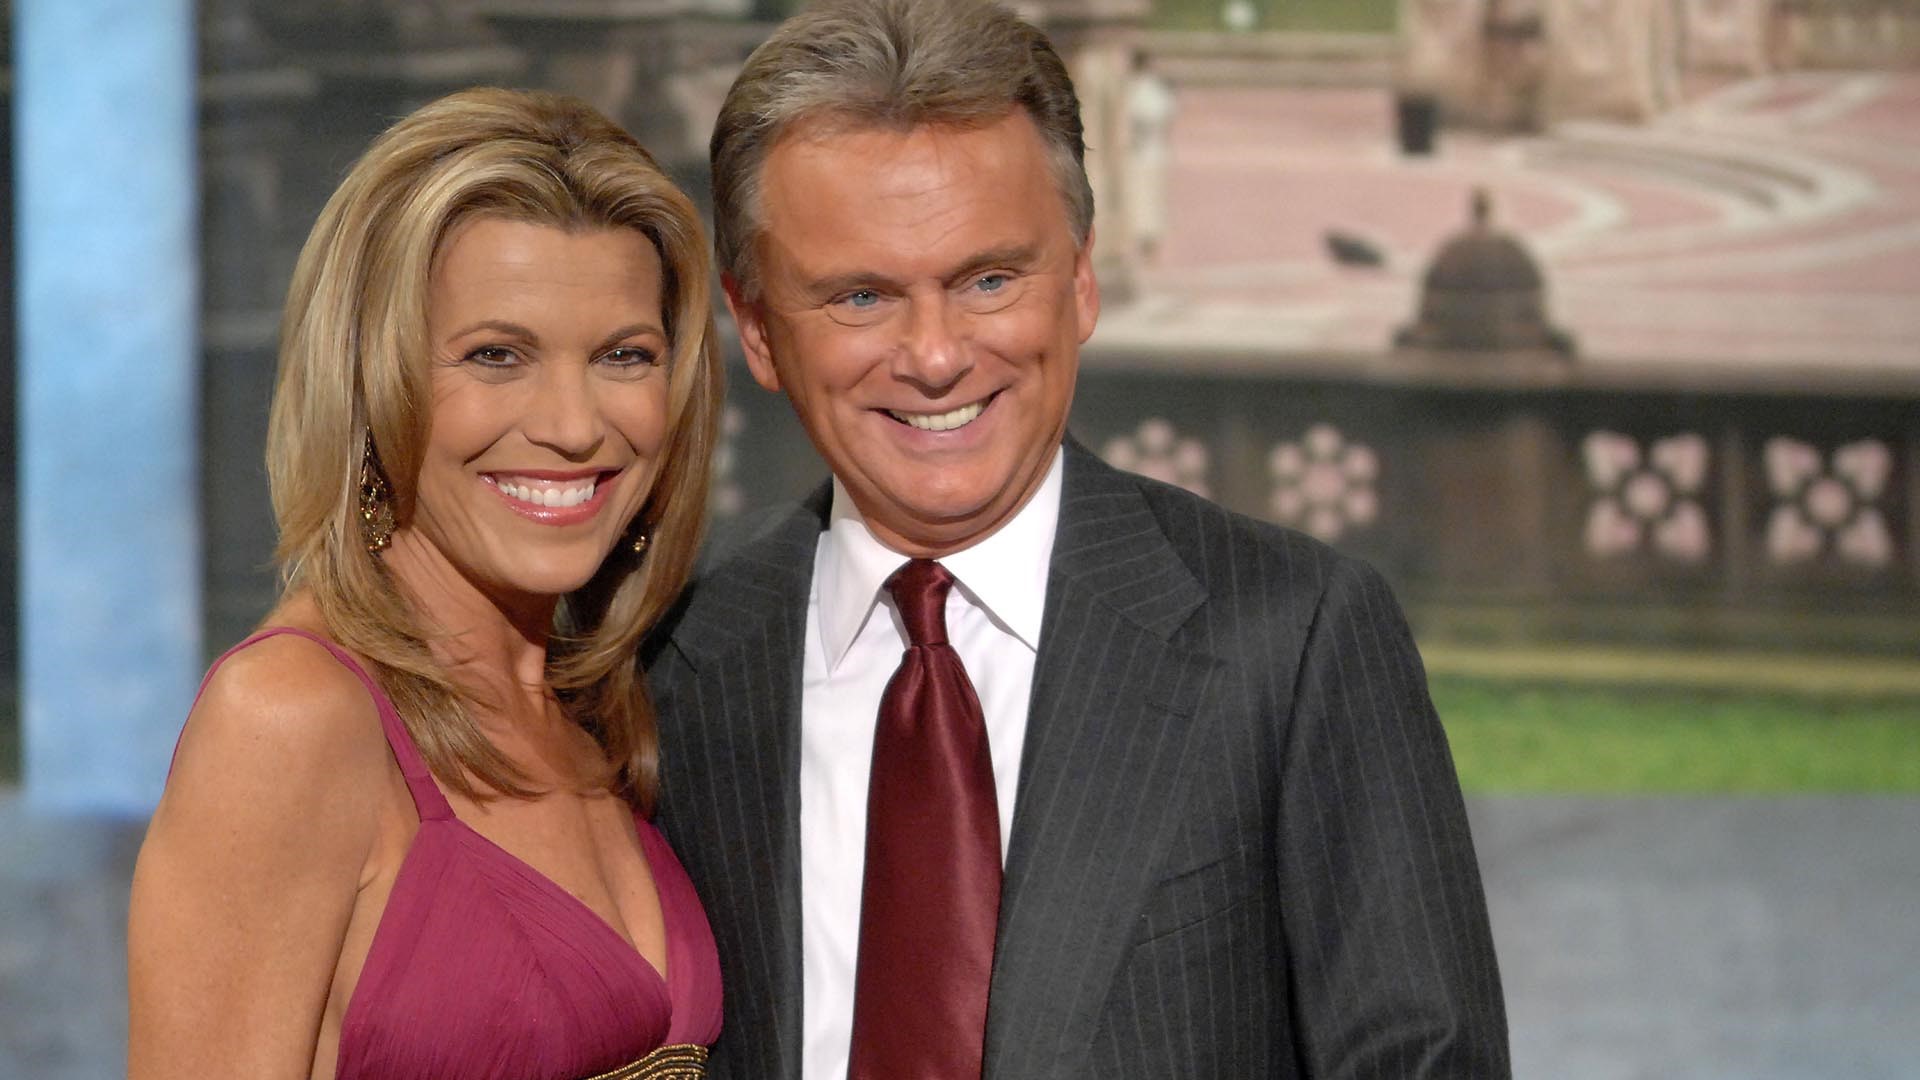 He hosted "America's Game" since Jimmy Carter was President, but Sajak says this upcoming Wheel of Fortune season will be his last.